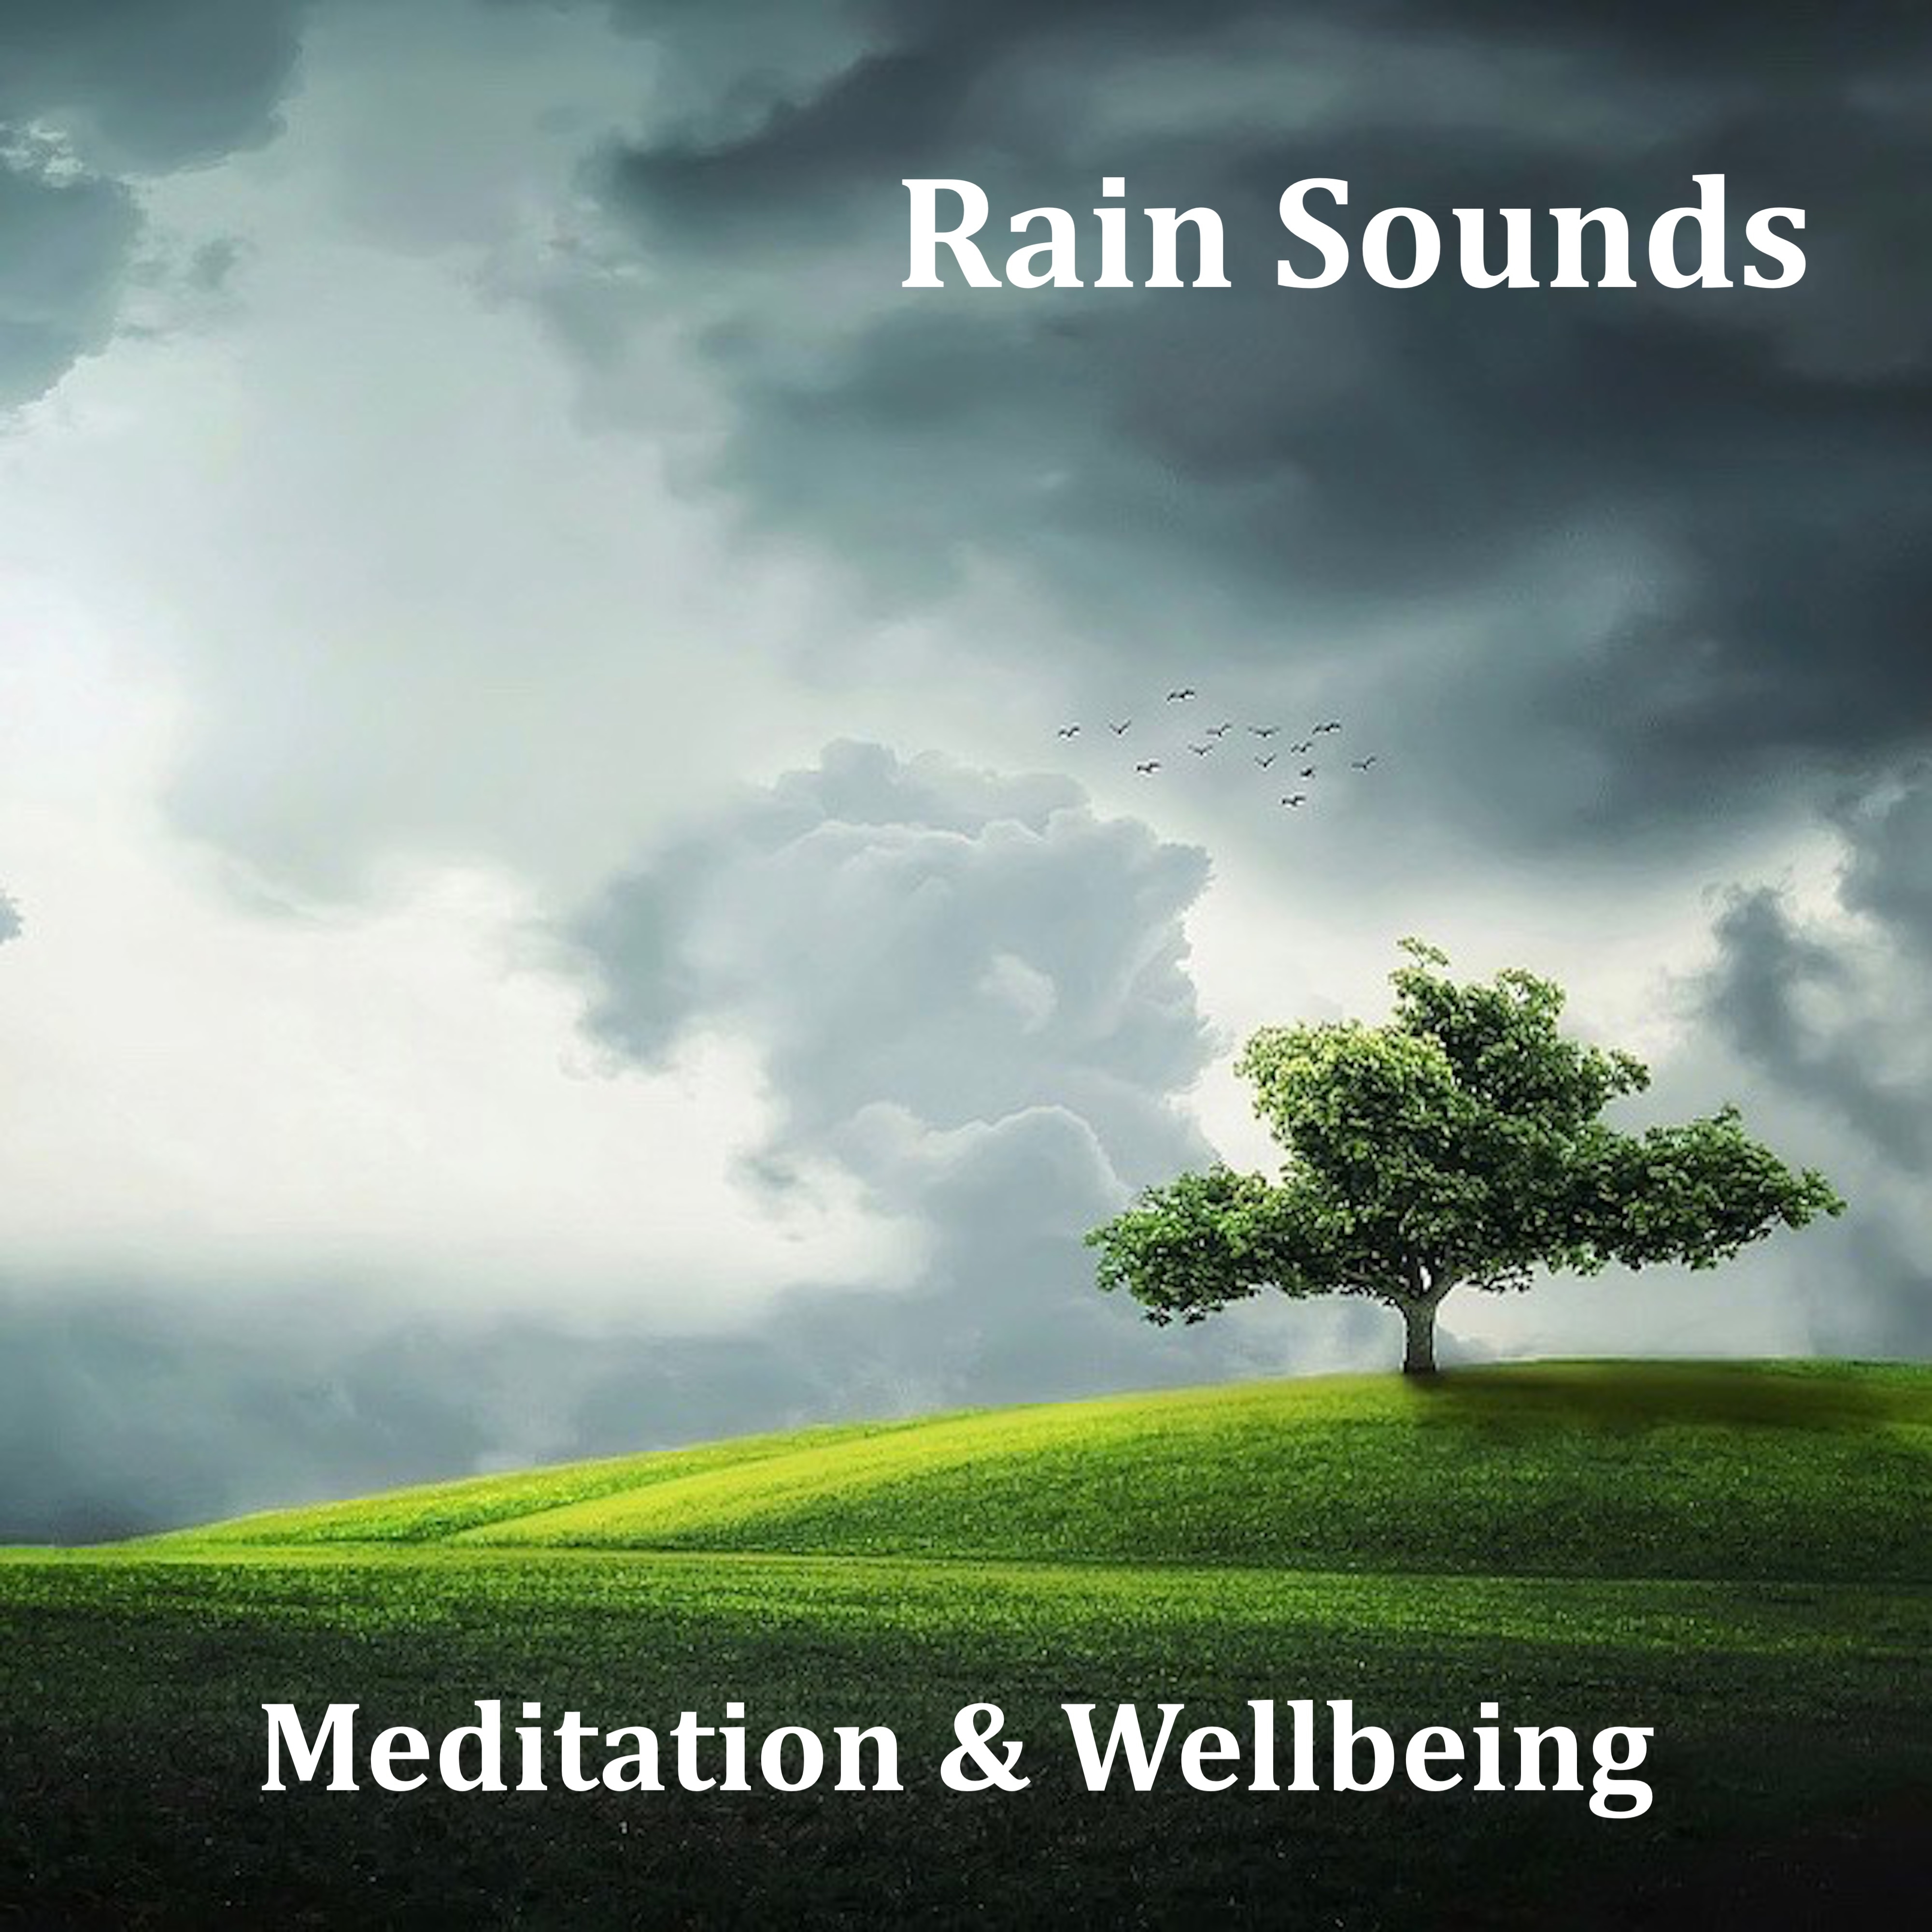 13 Loopable Meditation Rain Sounds for Mindfulness and Wellbeing